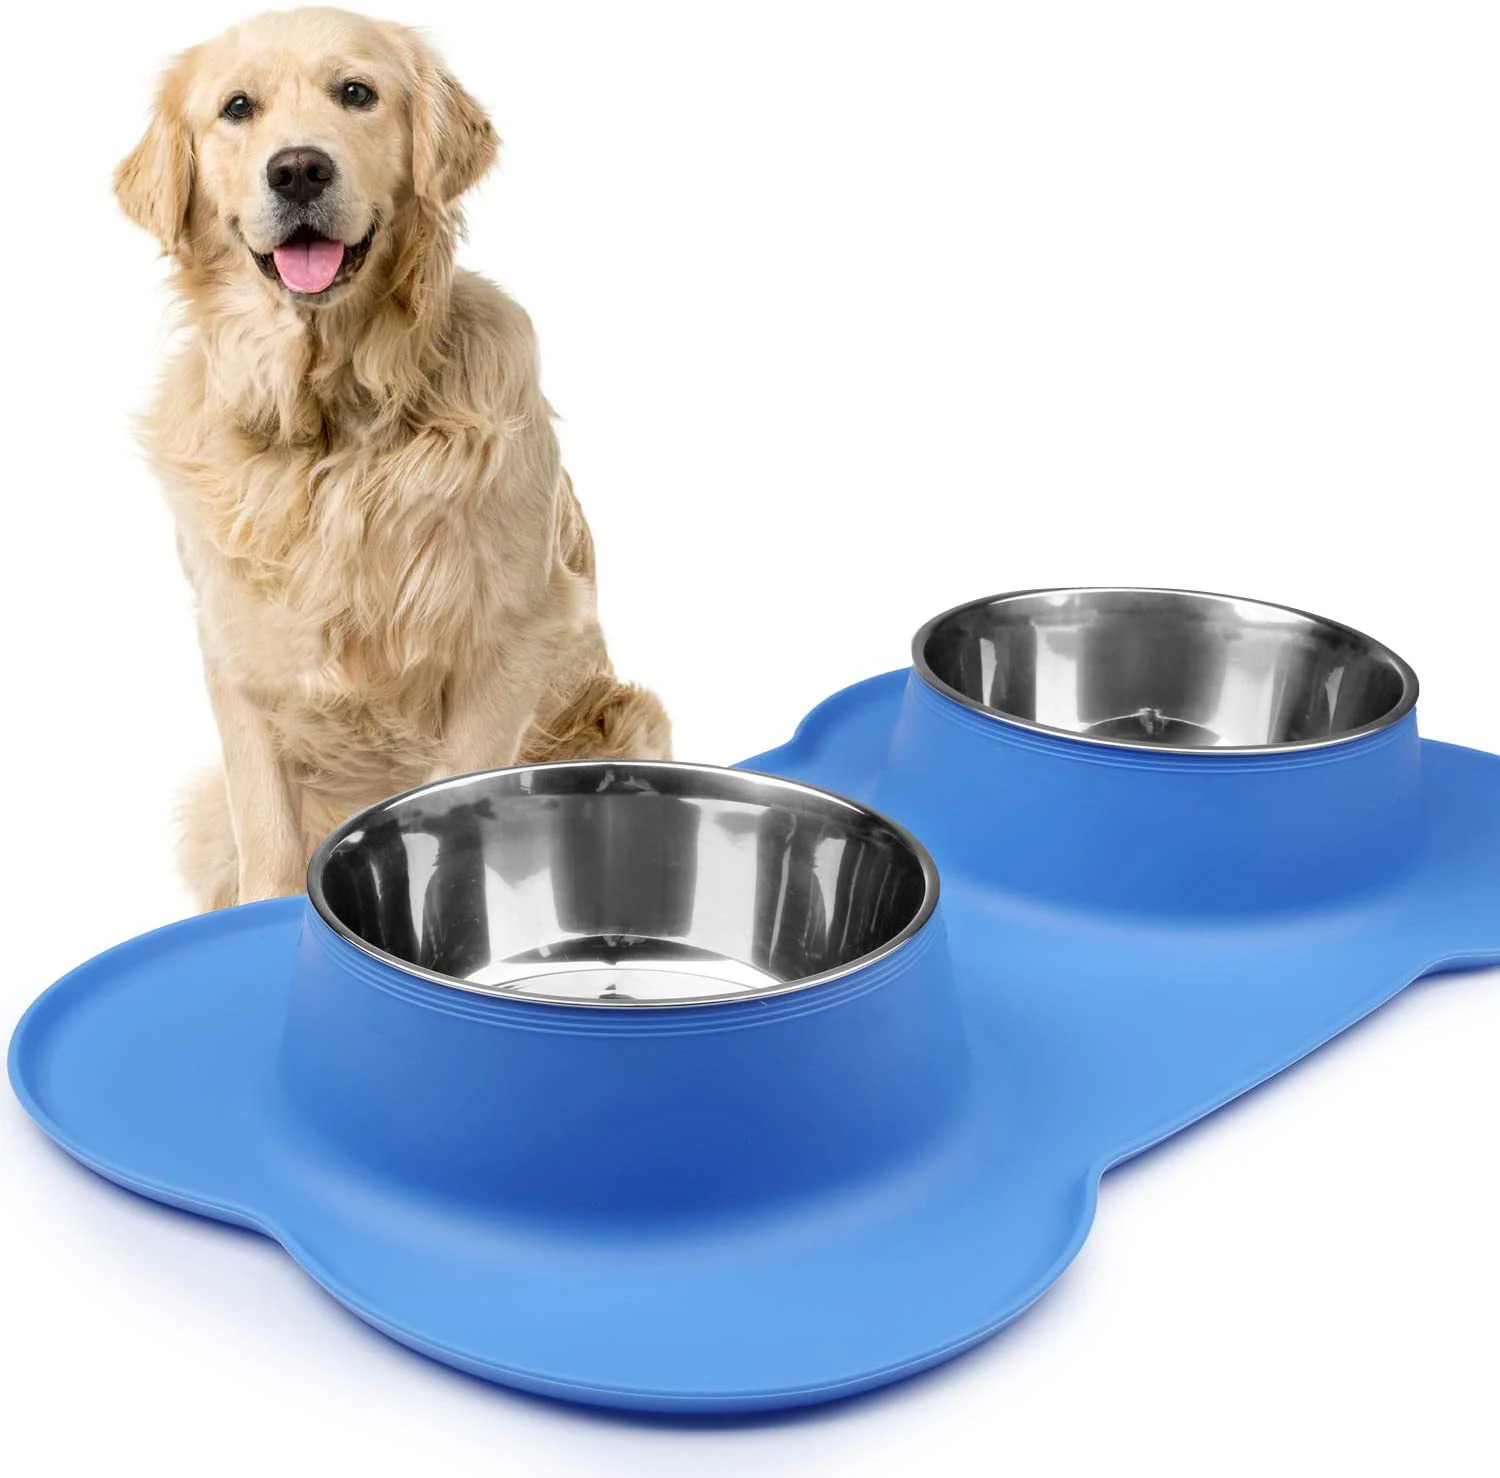 

Plastic PP Food Contact Ridges Mint Light Blue Violet Anti Slip Feet Pet Bowls with 2 Stainless Steel for Cats and Dogs Bowl., Black, gray, blue